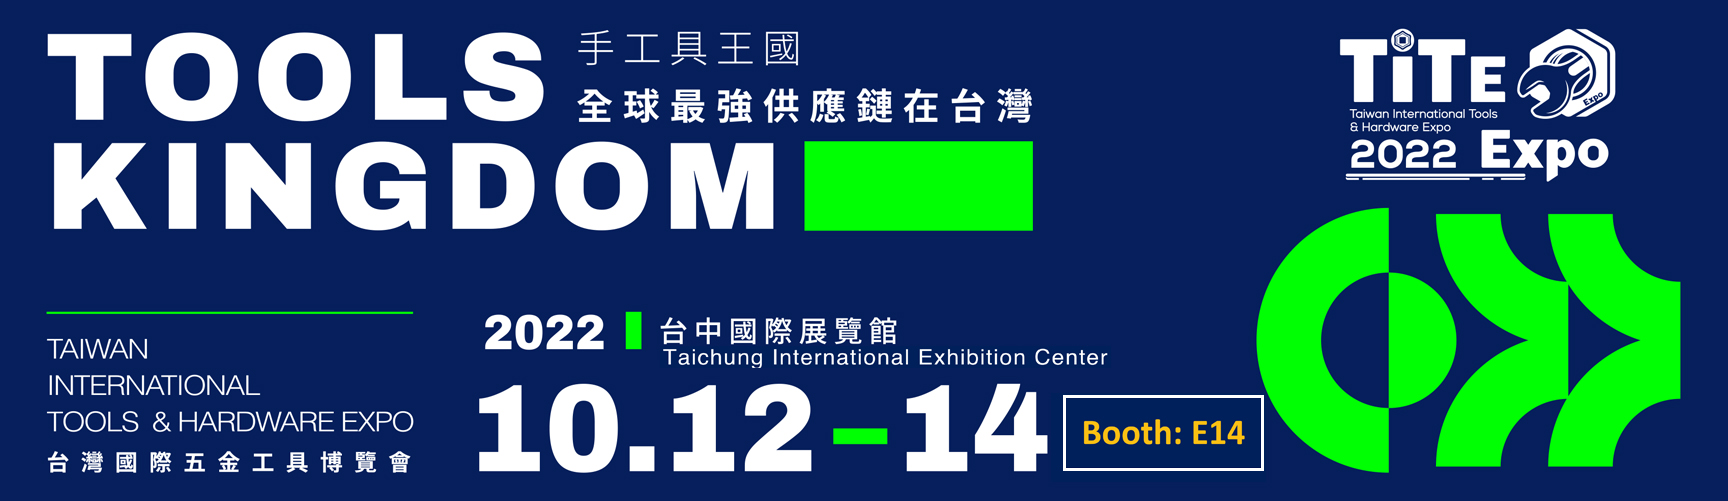 Welcome to Taiwan International Tools & Hardware Expo 2022